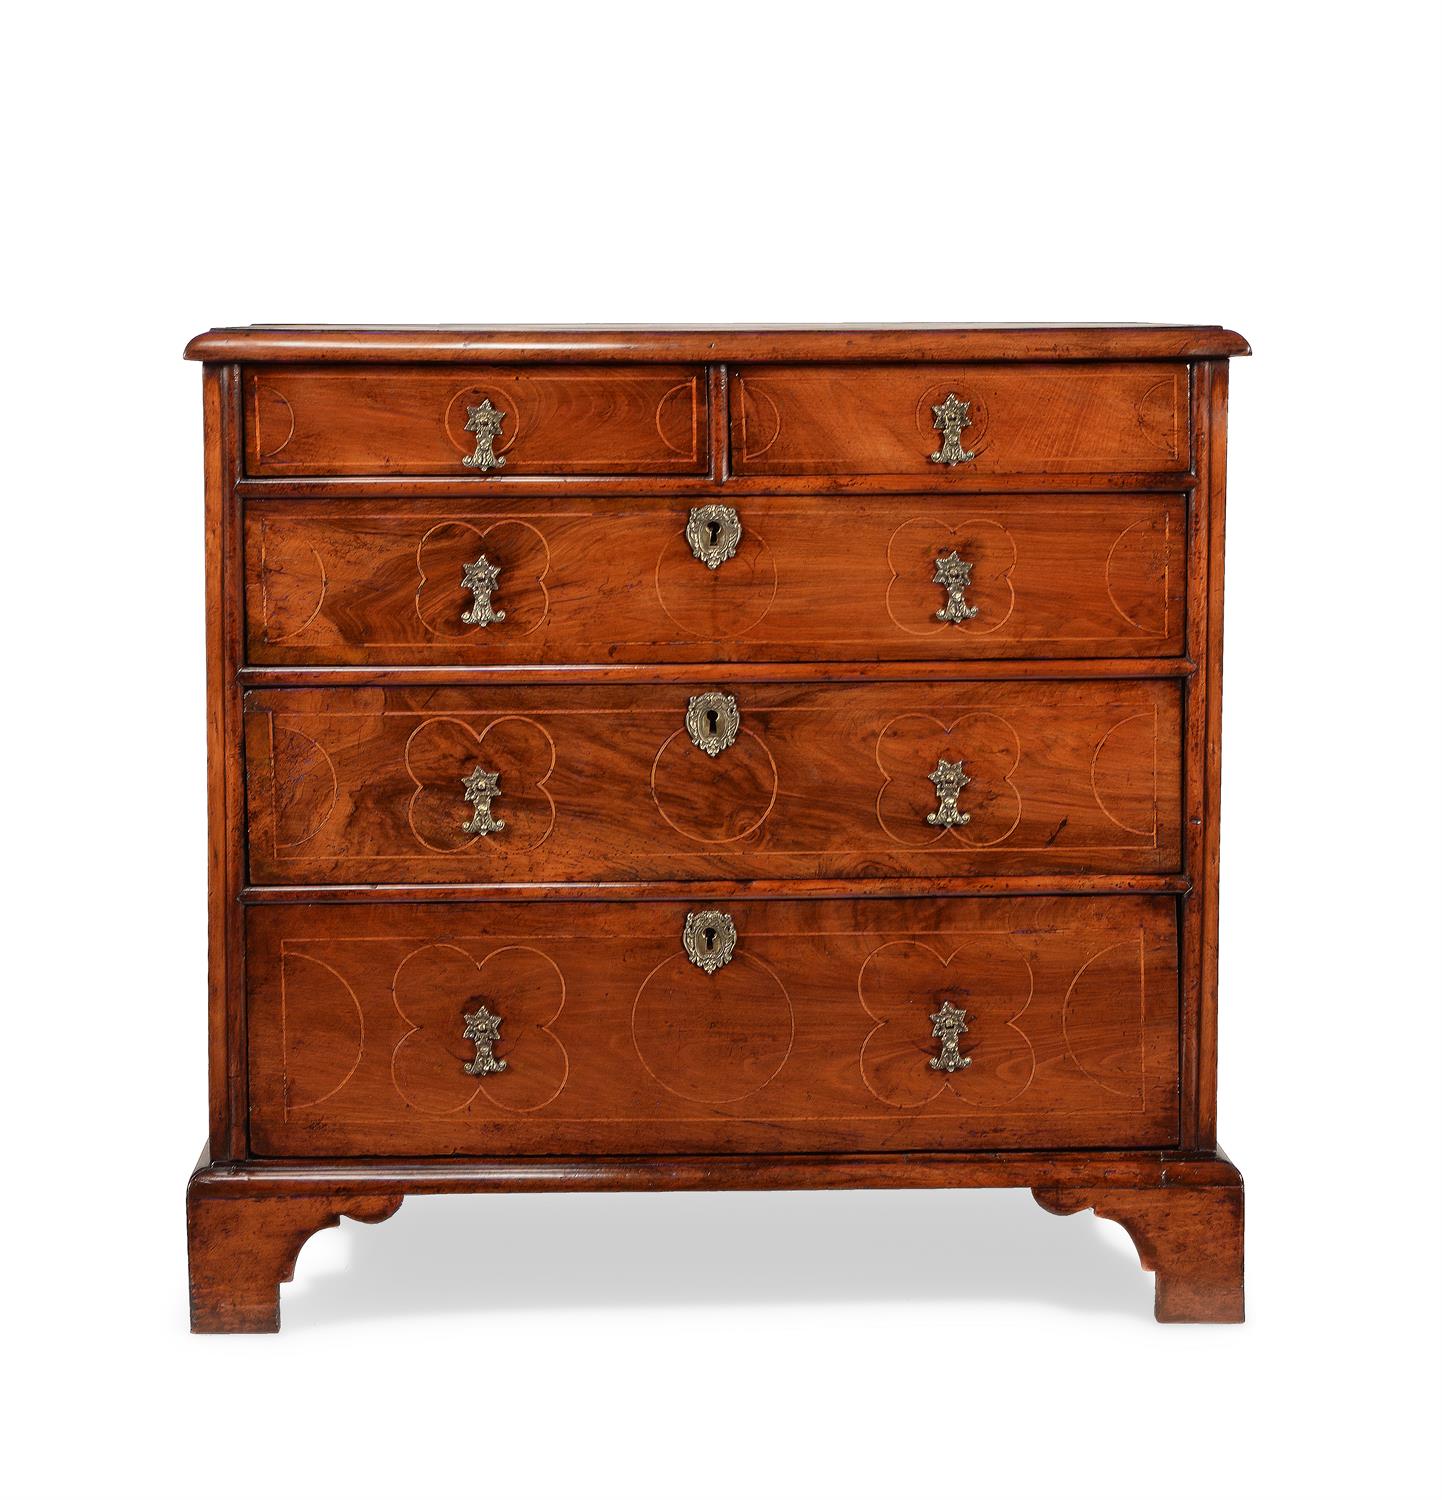 A walnut and fruitwood inlaid chest of drawers, circa 1700 and later - Image 3 of 4